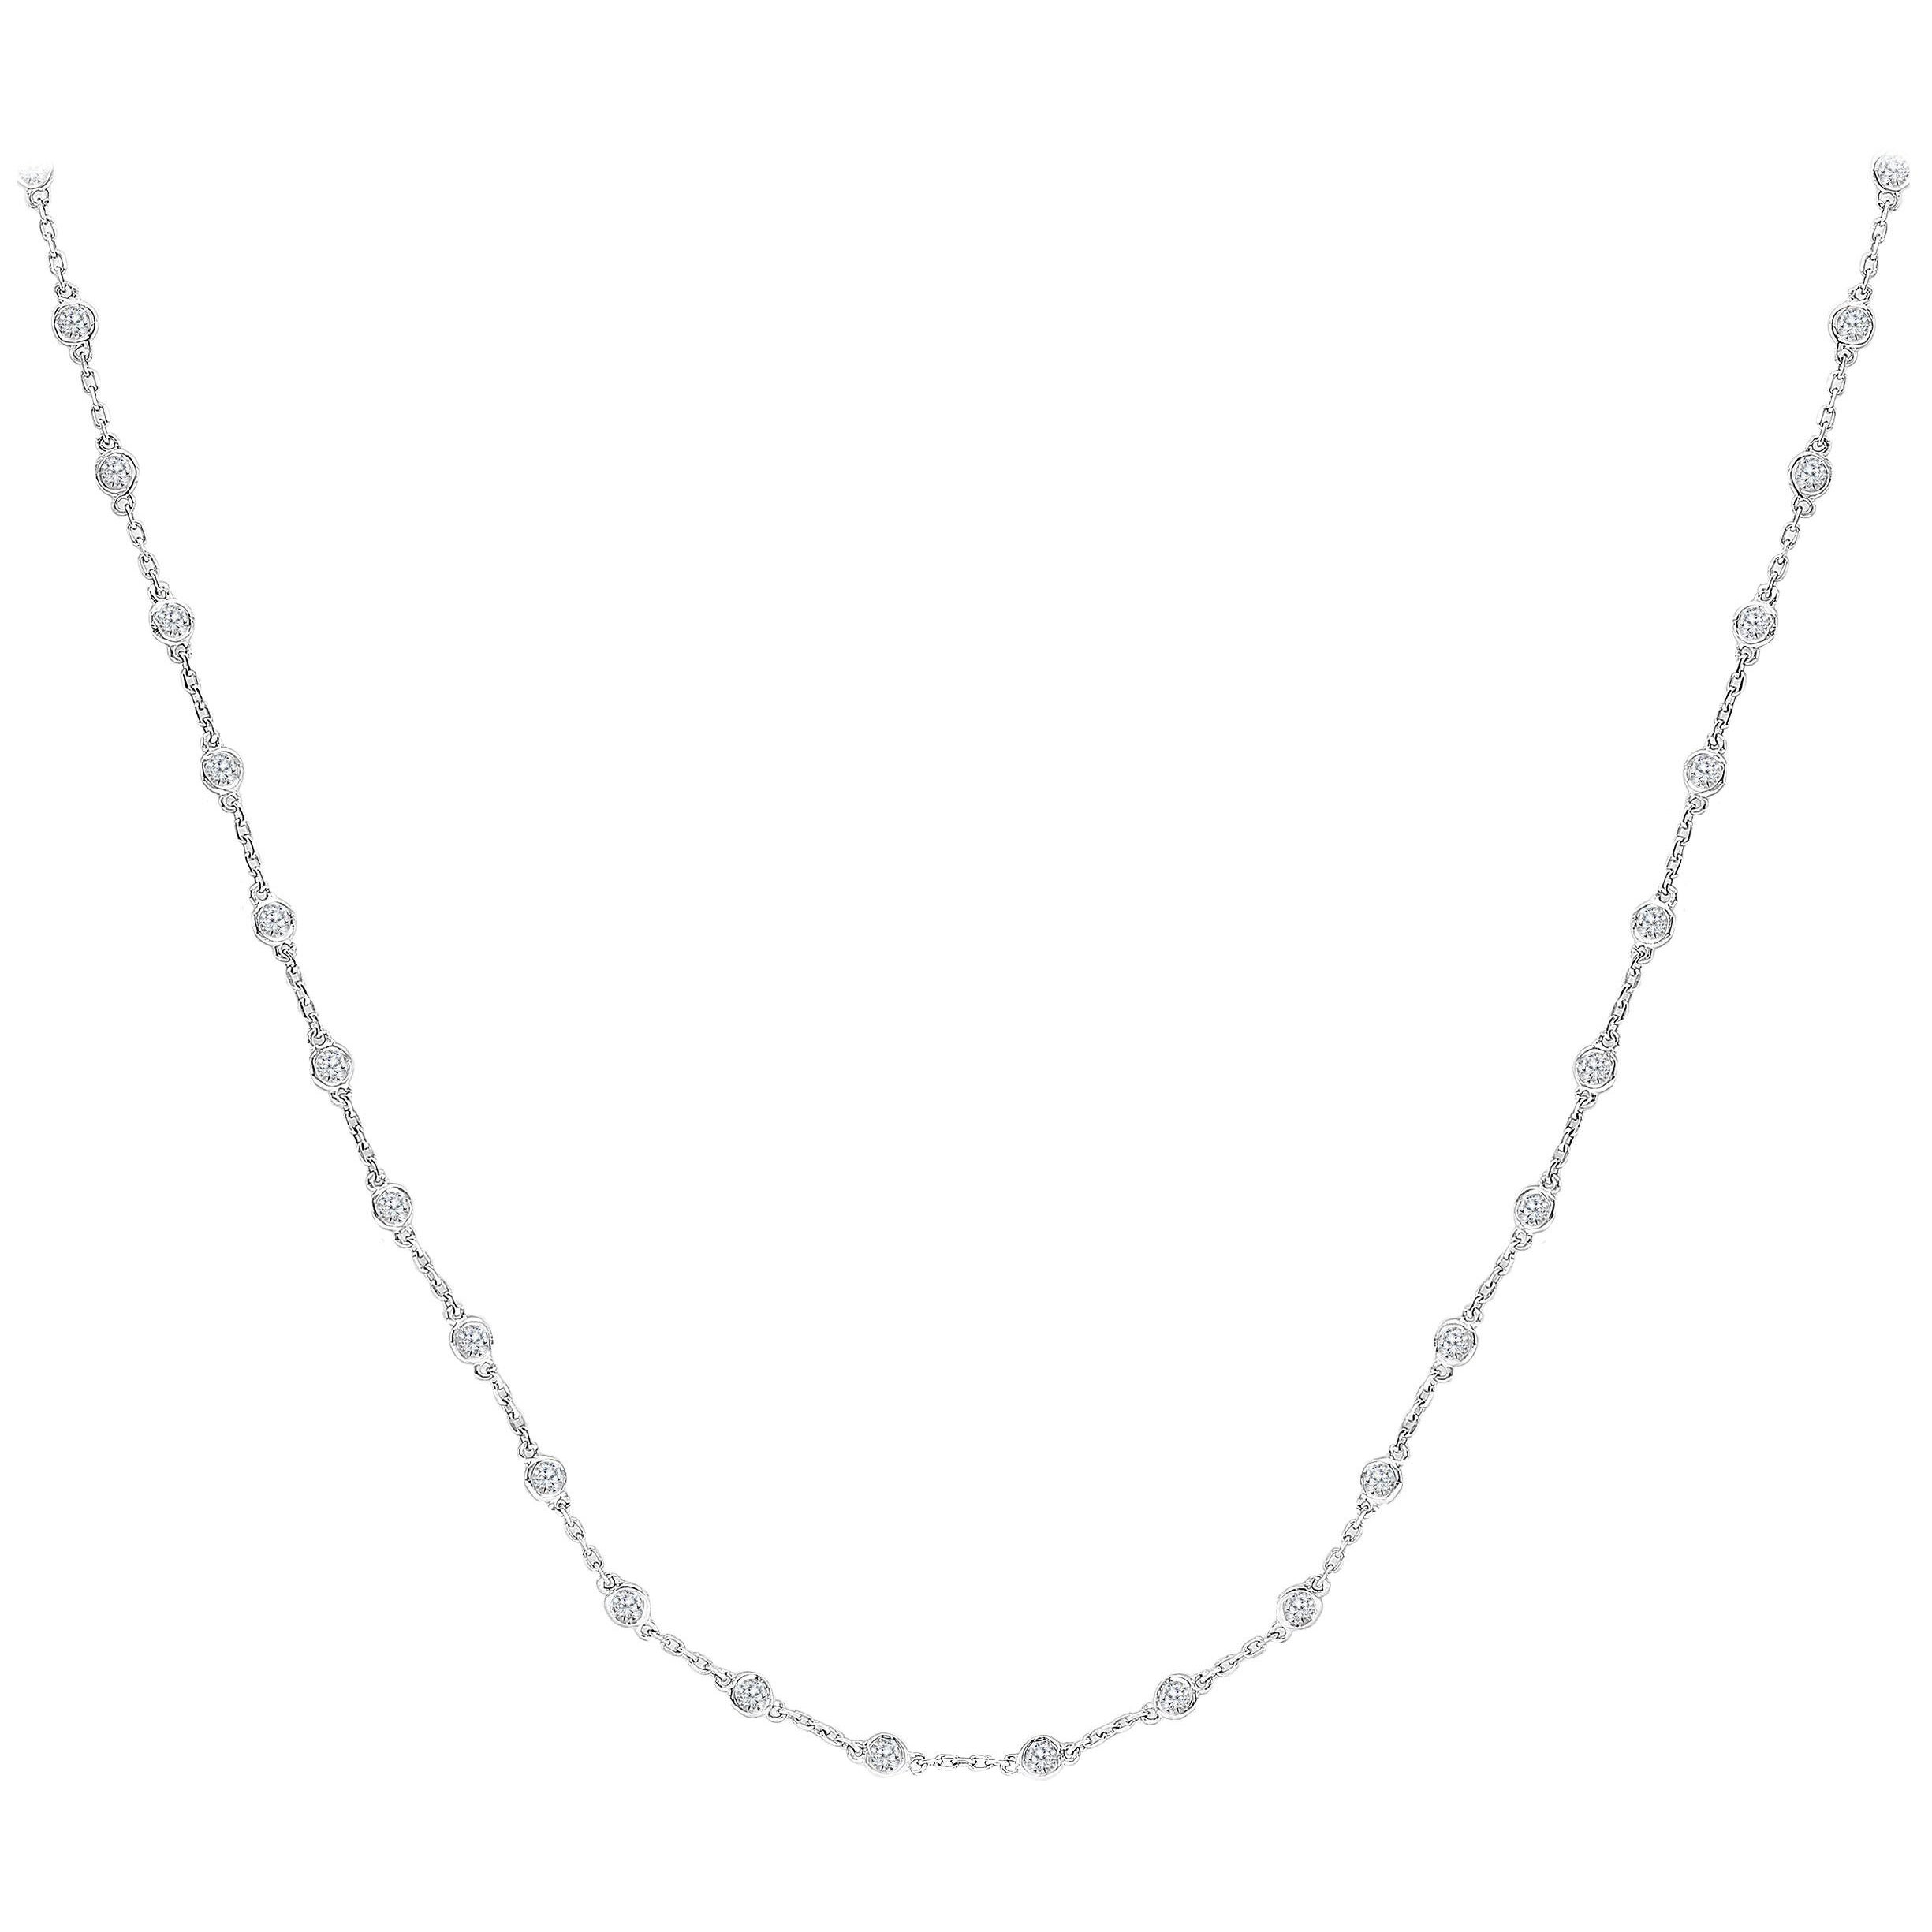 3.33 Carat Diamond by the Yard Chain Necklace in 14K White Gold For Sale